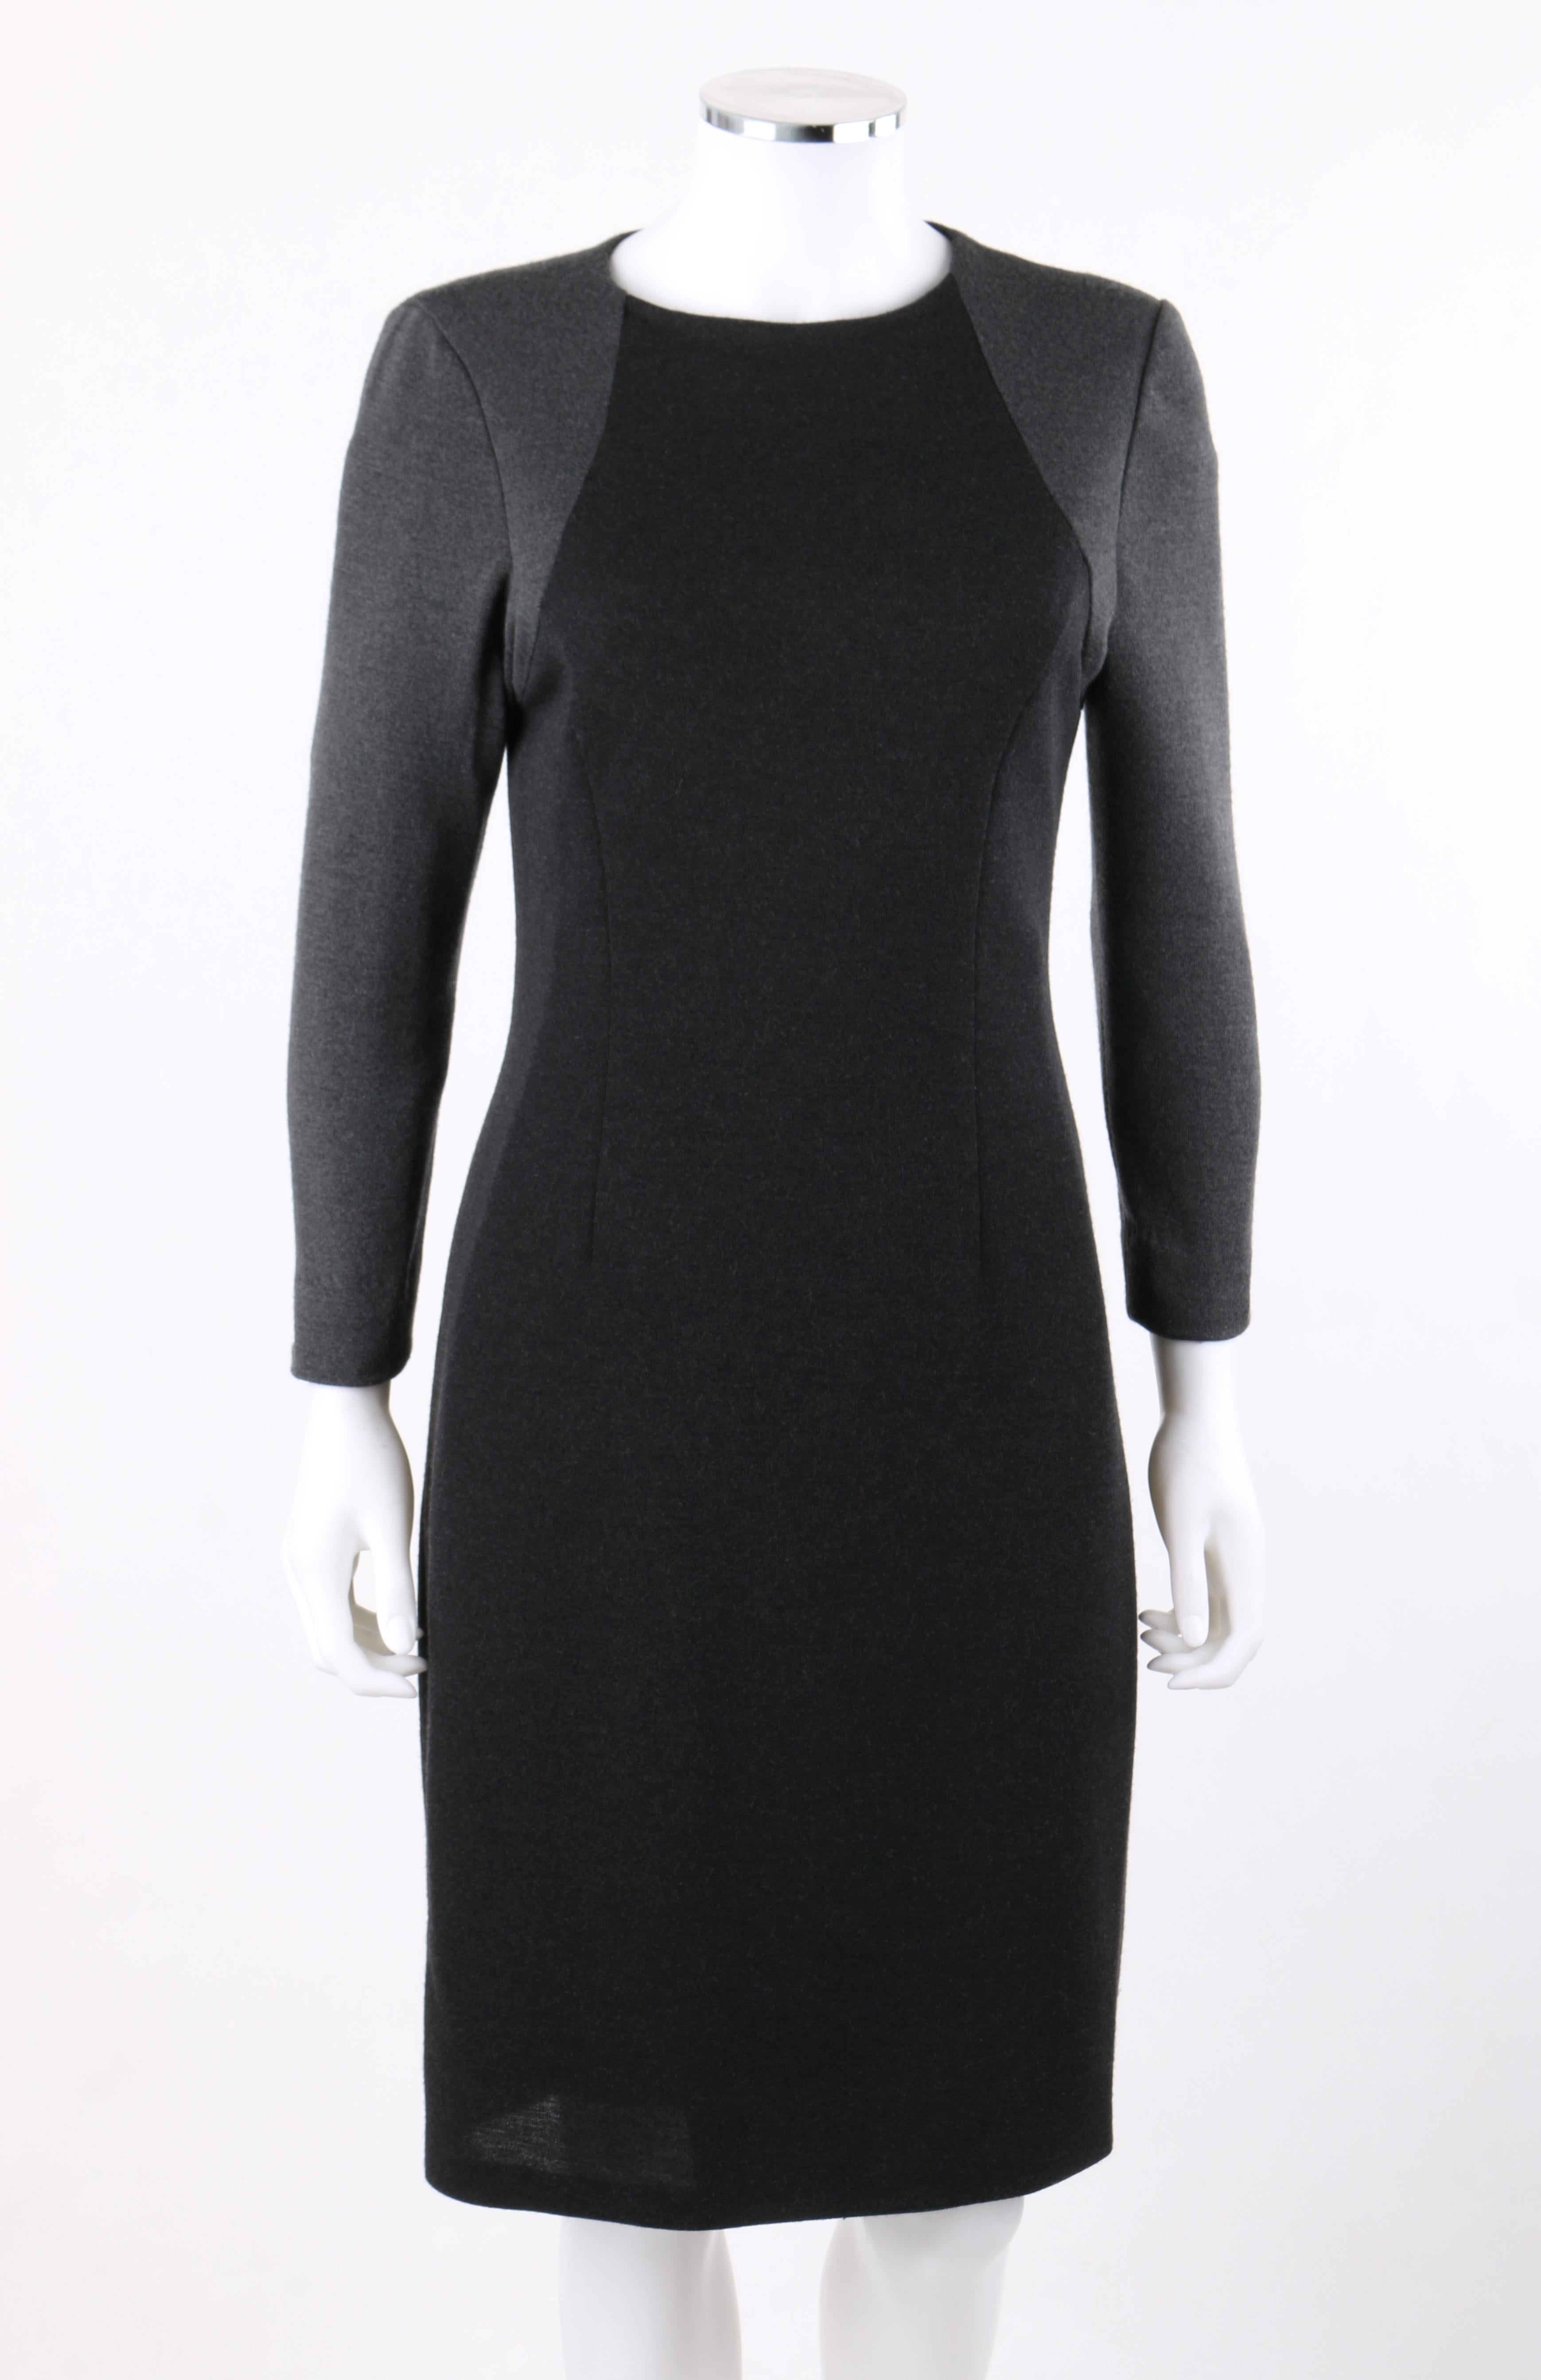 BILL BLASS c.1980’s Gray Black Color Block Long Sleeve Fitted Knit Sheath Dress
 
Circa: 1980’s
Label(s): Bill Blass
Designer: Bill Blass
Style: Long sleeve fitted sheath dress
Color(s): Shades of gray and black
Lined: Yes
Unmarked Fabric Content